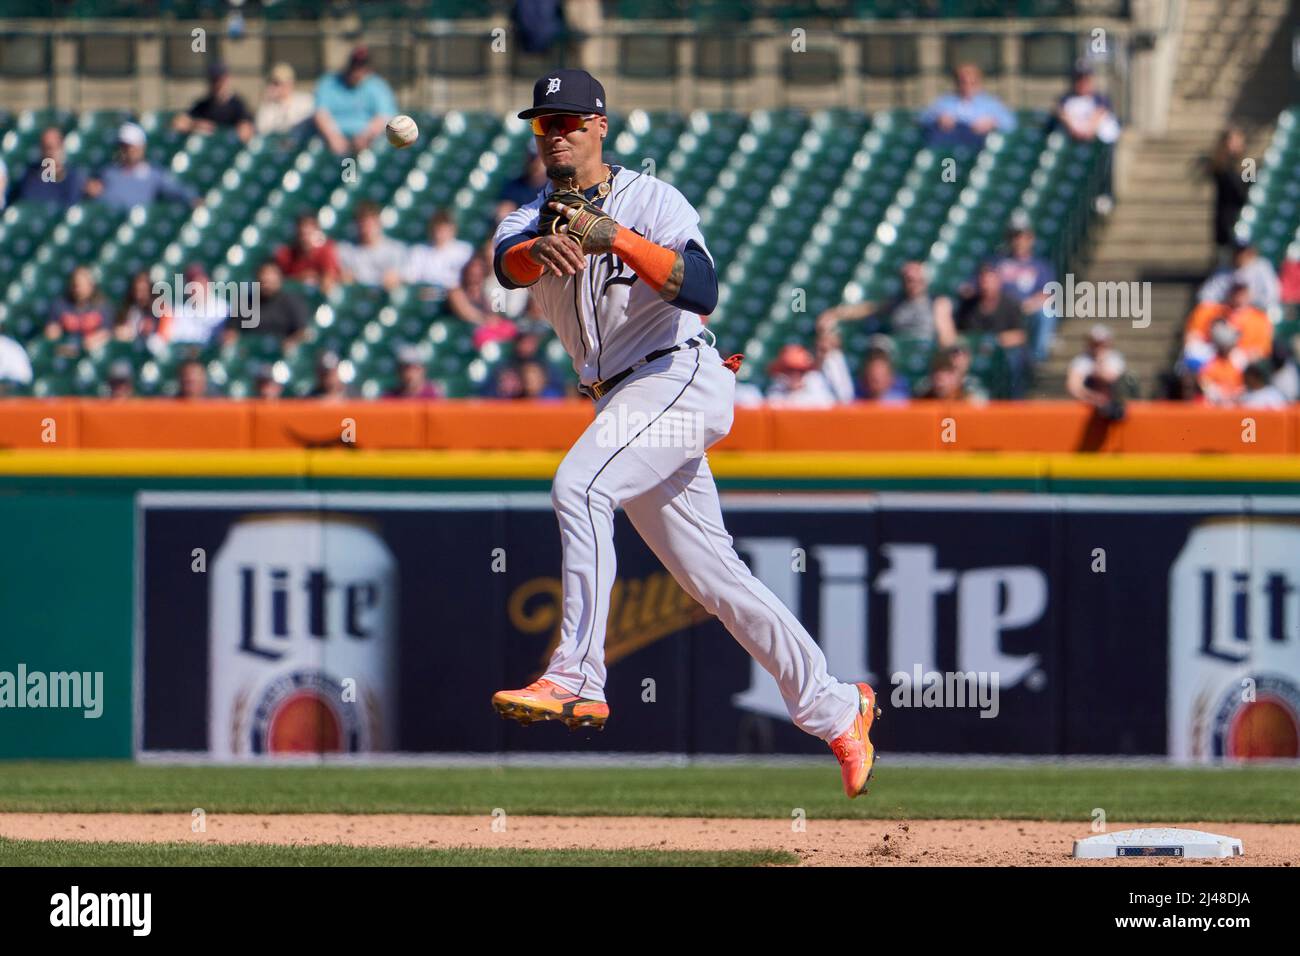 DETROIT, MI - APRIL 12: Detroit Tigers shortstop Javier Baez (28) fields  his position during an MLB game against the Boston Red Sox on April 12,  2022 at Comerica Park in Detroit